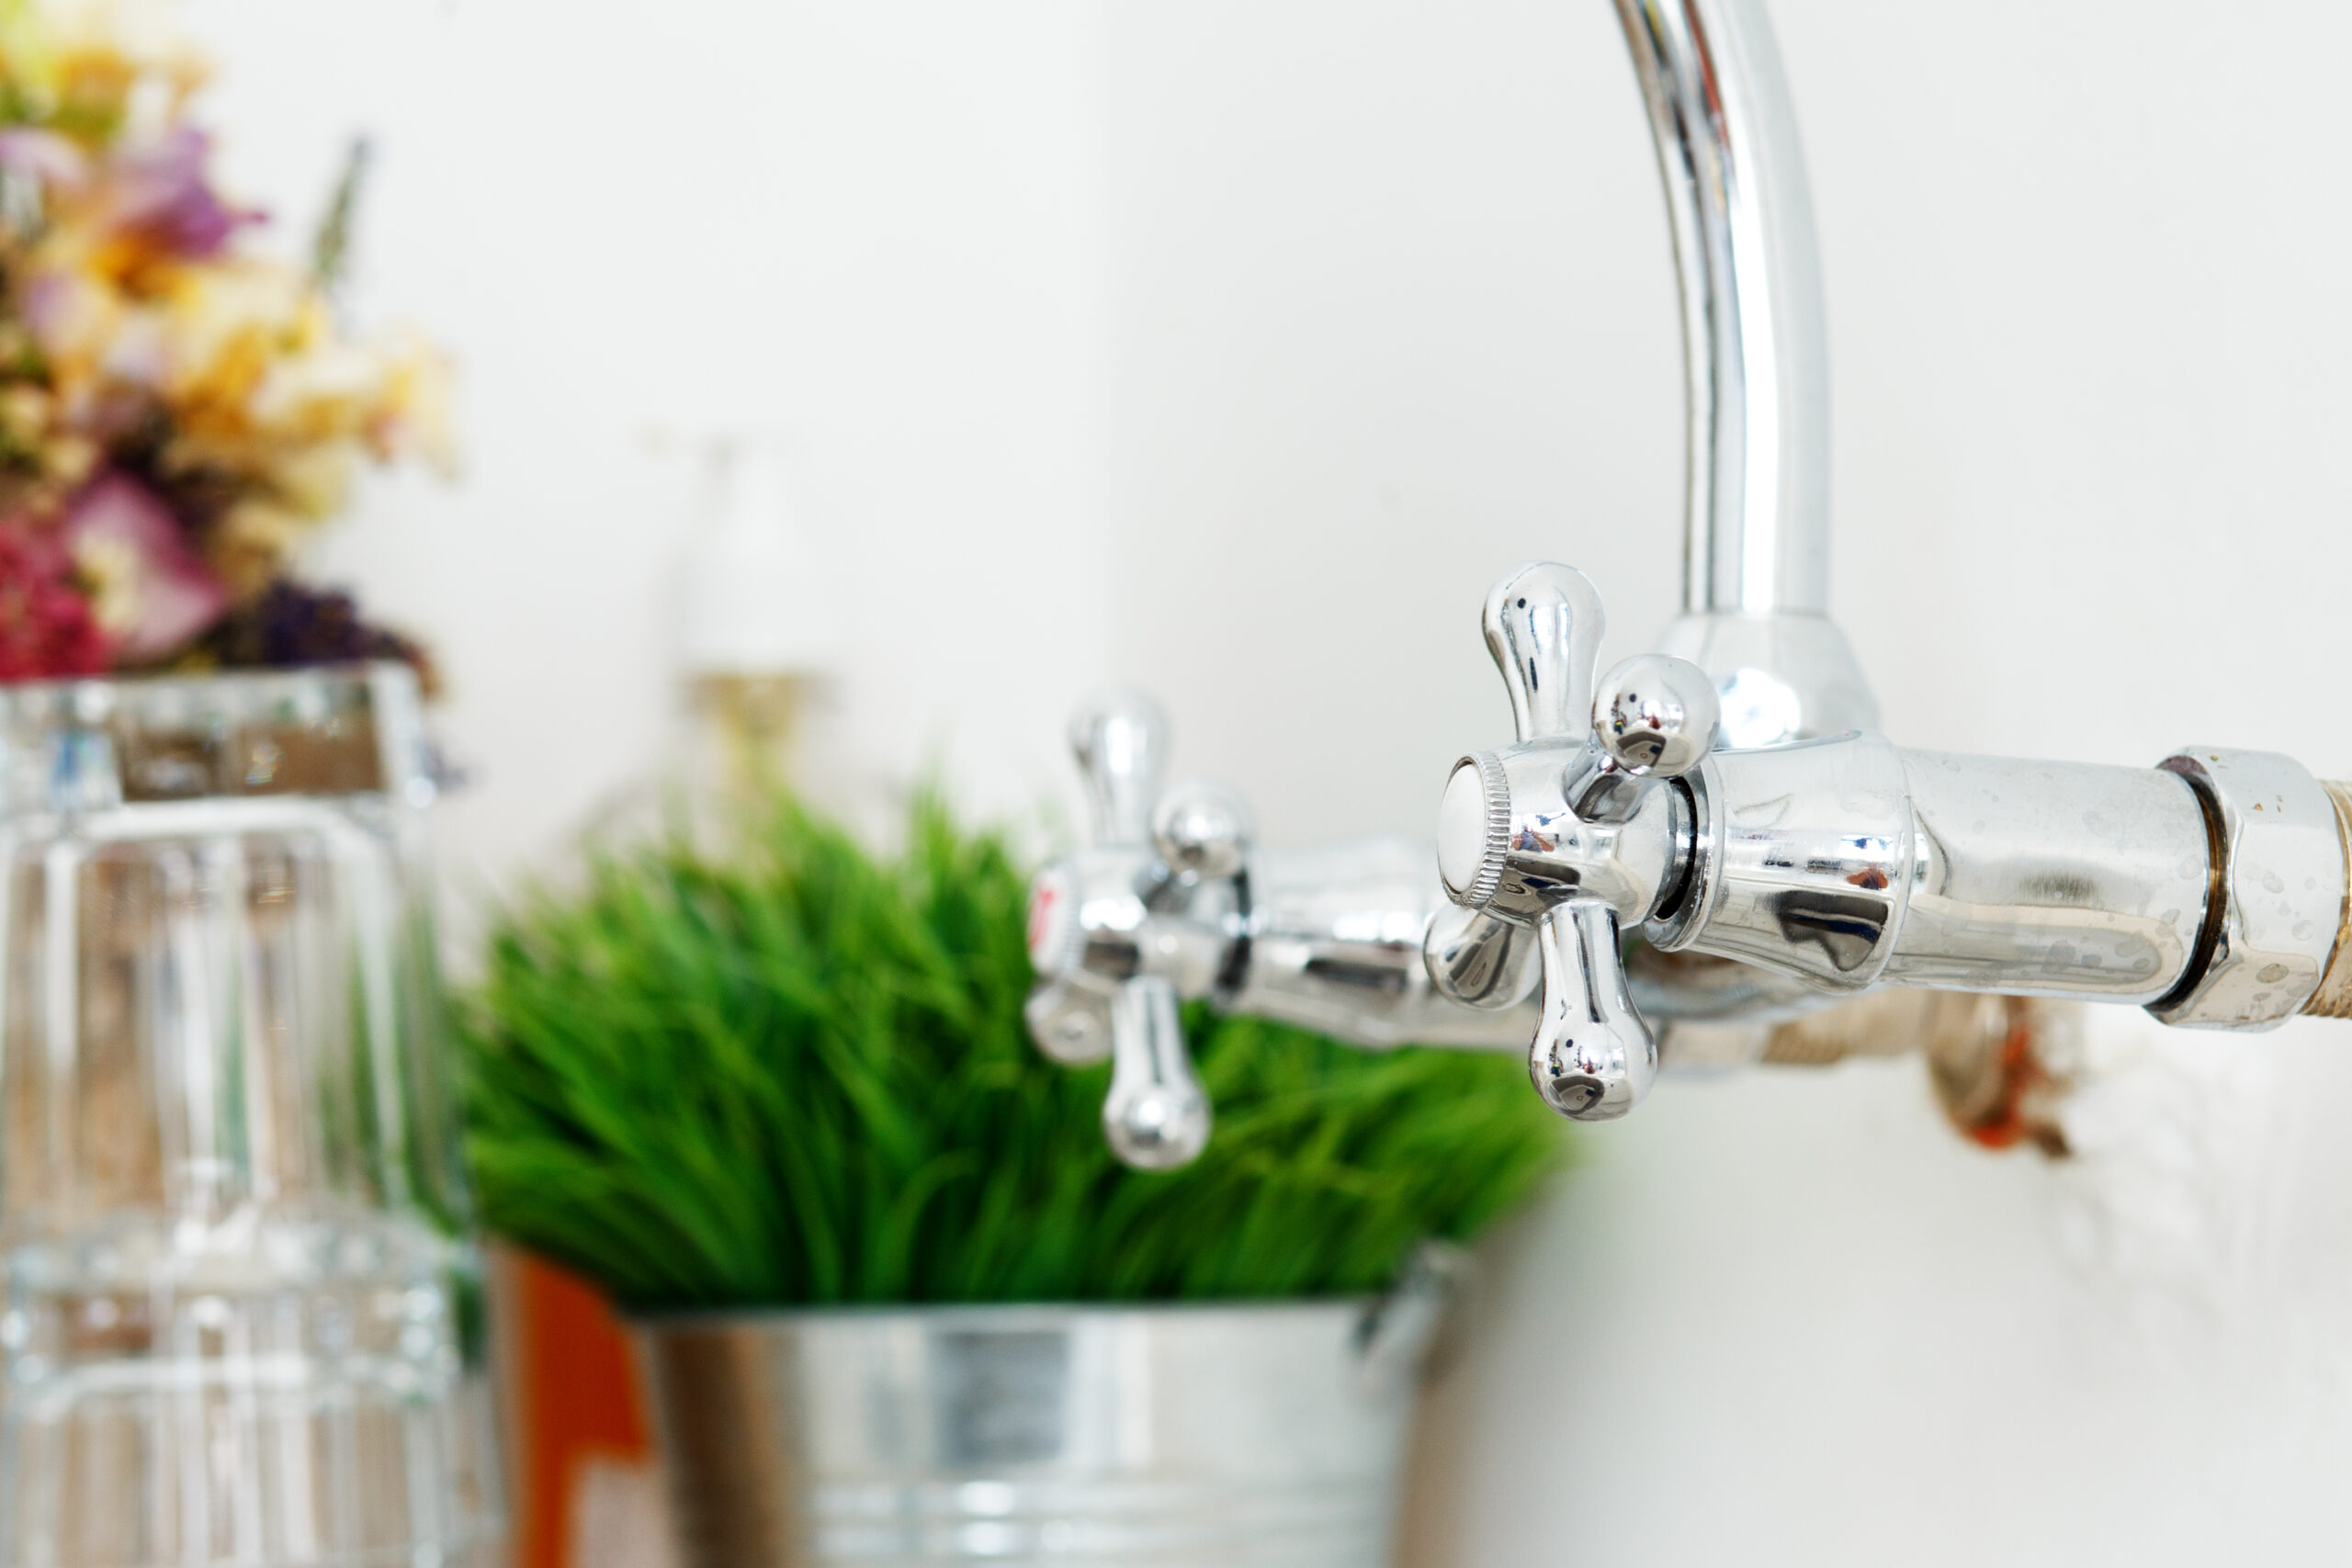 Environmentally-Friendly Plumbing Solutions in Vancouver for Eco-Friendly Homes